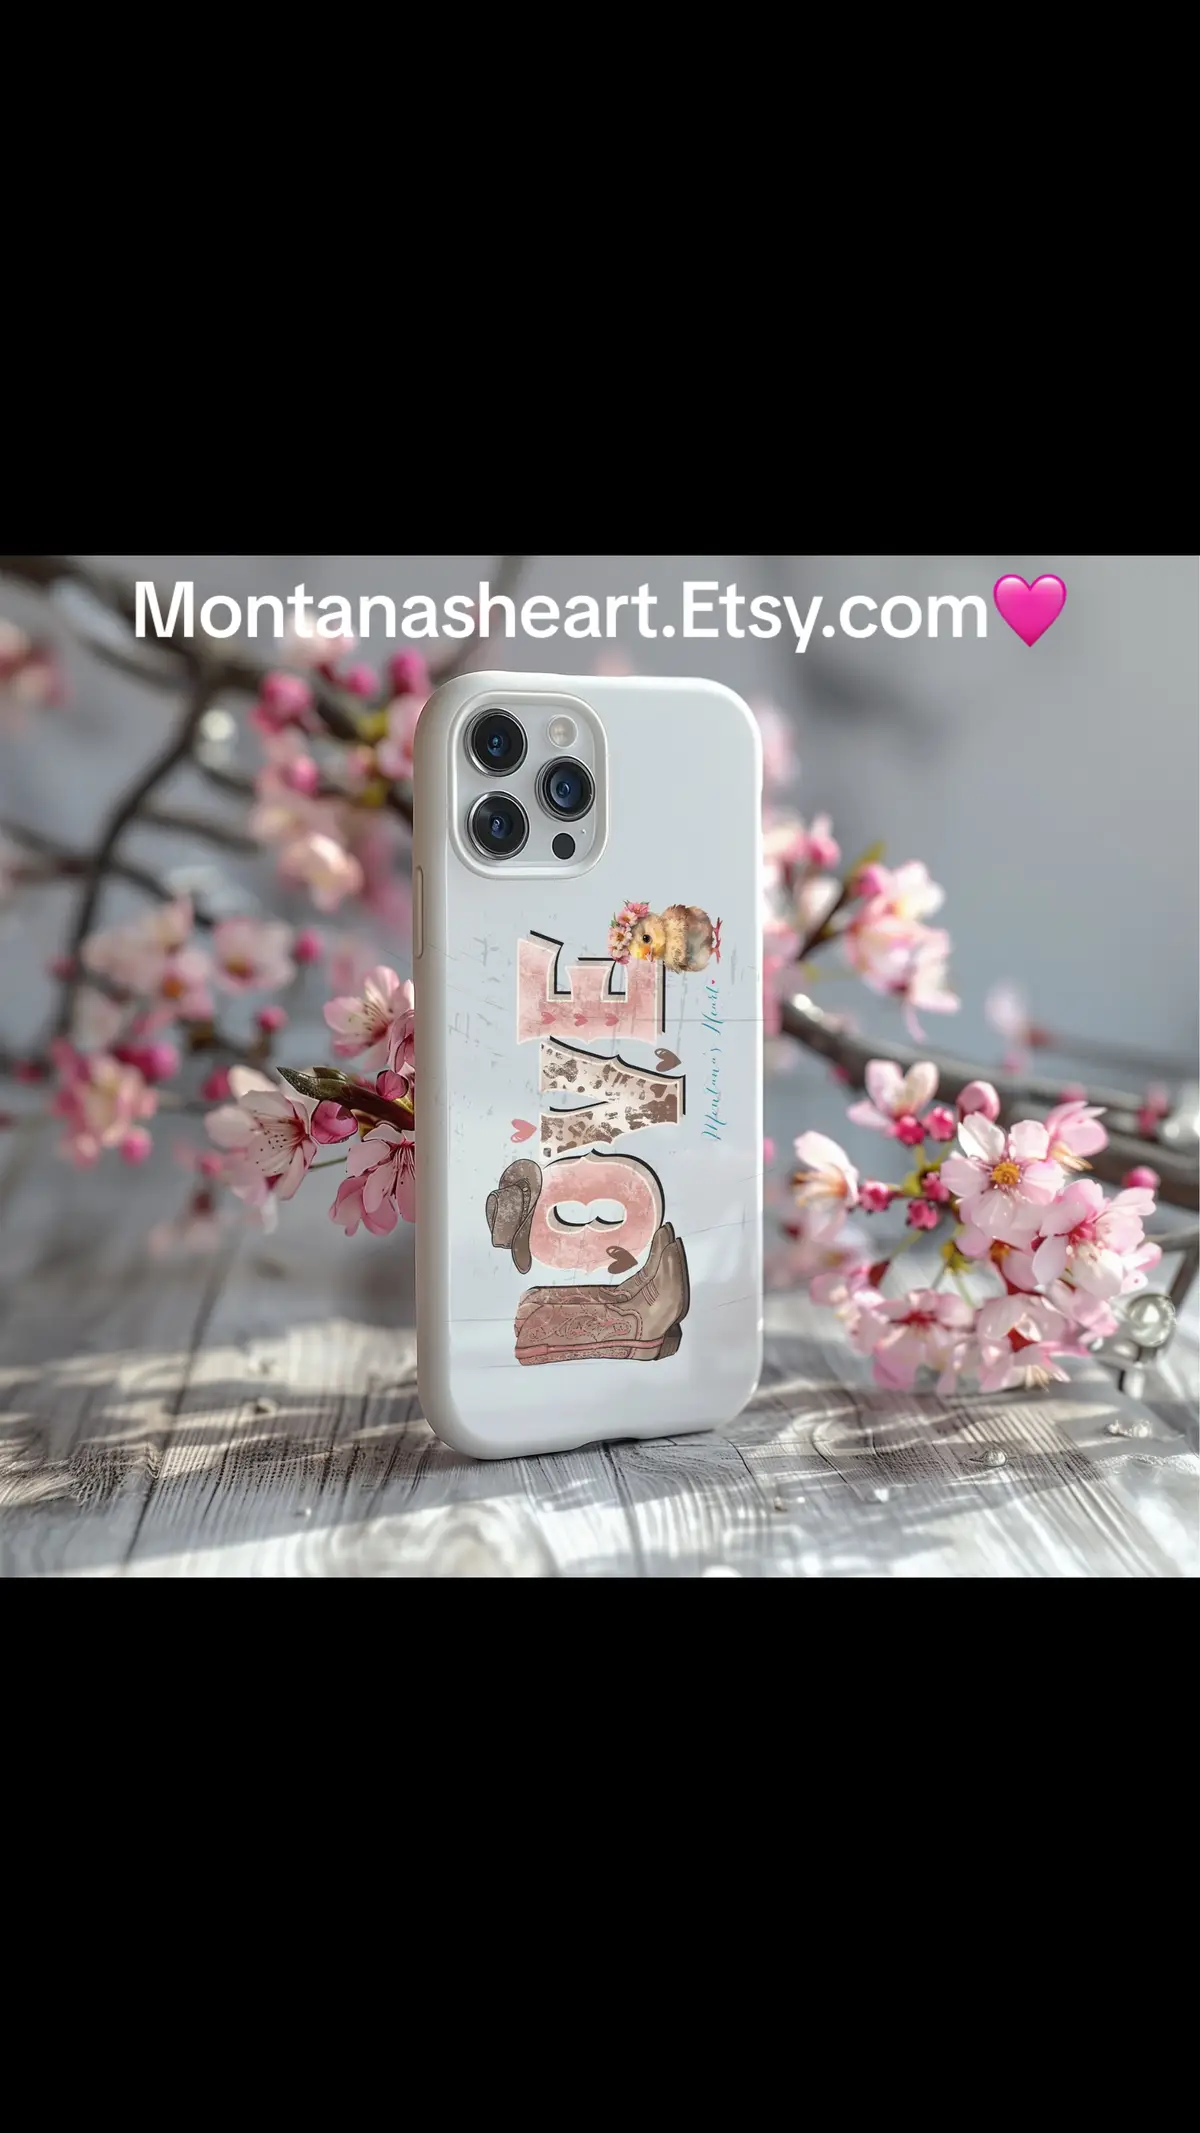 Love🩷 Beautiful phone case, sweet vintage boot and baby chic phone case. On sale now https://montanasheart.etsy.com/listing/1687721402 #youarebeautiful #montanasheart #gift #Love #etsyshop #faith #downsyndromerocks #inspiration #selflove #purposedriven #specialneedsmom 🩷🩷🩷